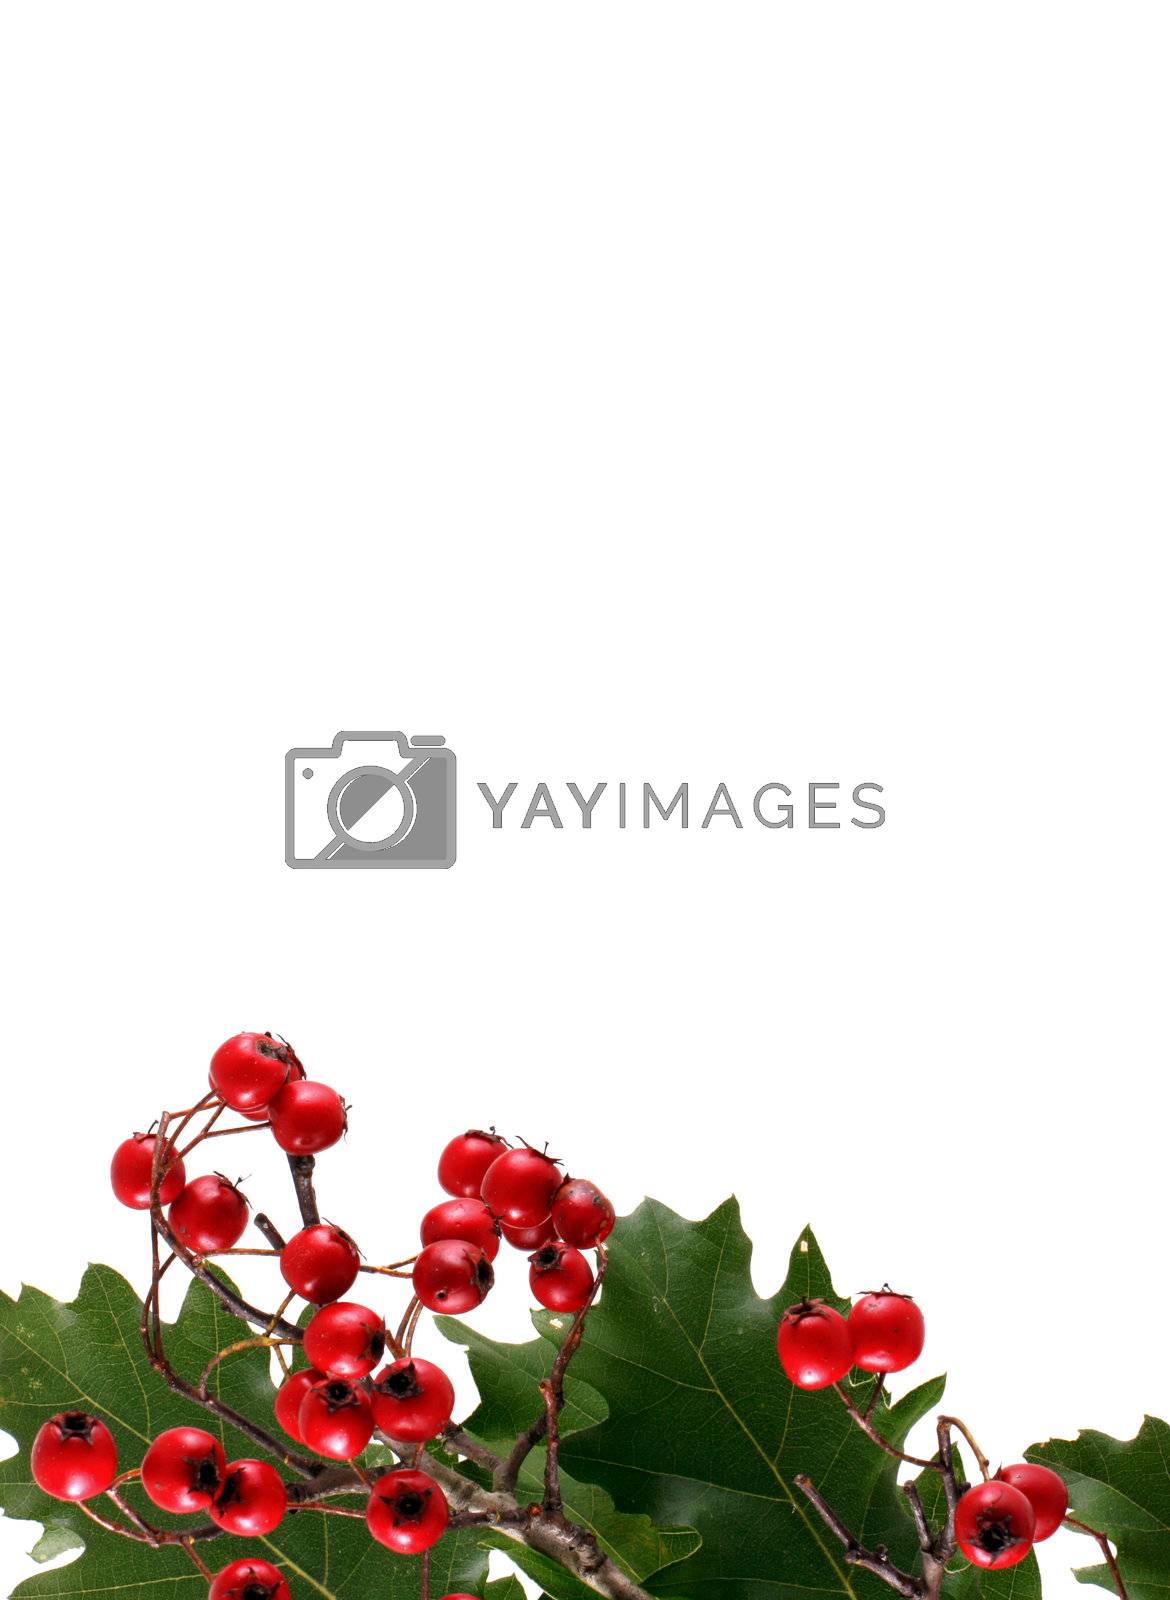 Royalty free image of Christmas background by nenov